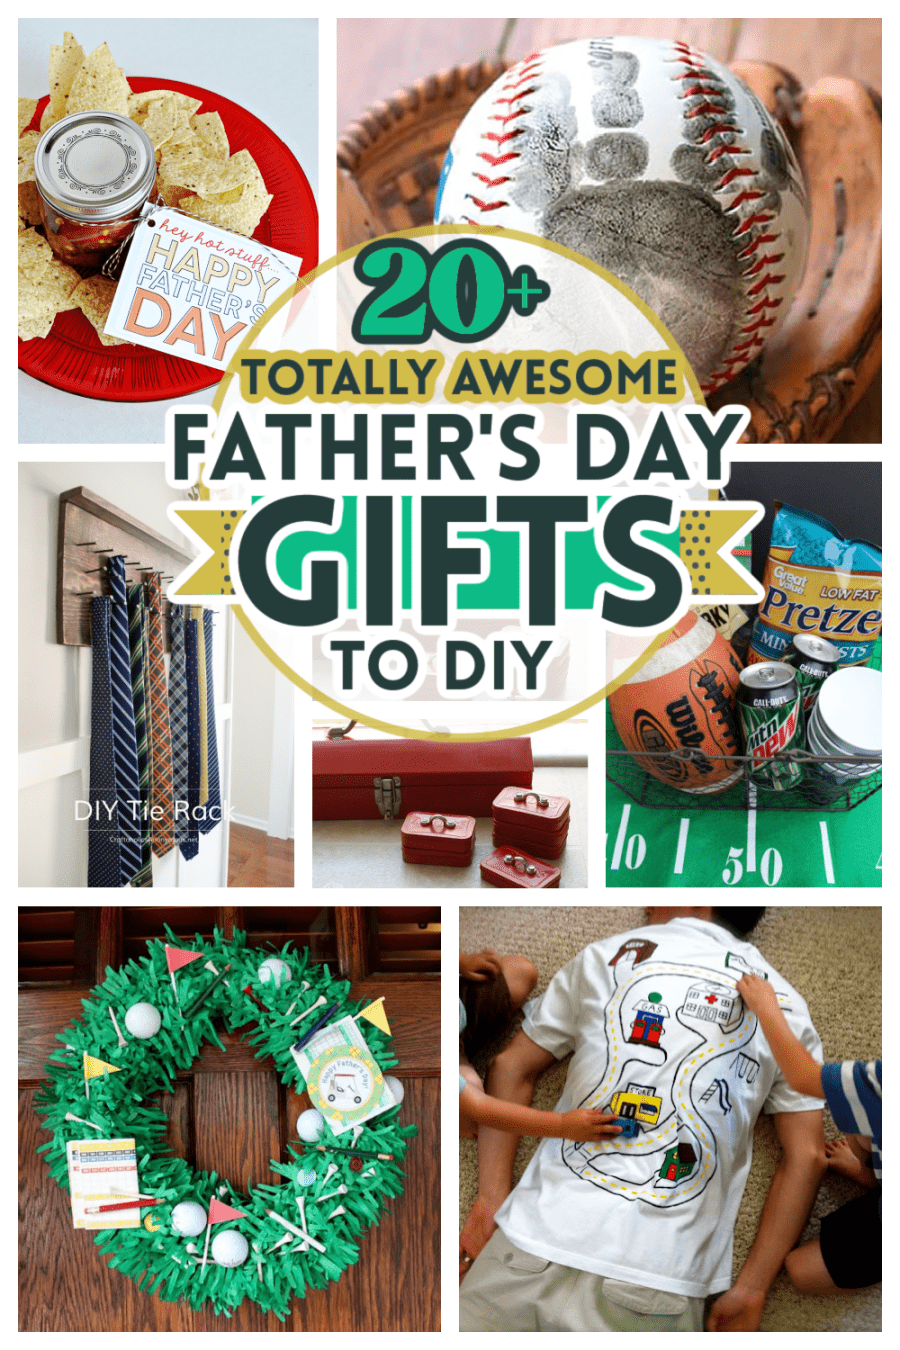 https://www.agirlandagluegun.com/wp-content/uploads/2014/06/20-totally-awesome-fathers-day-gifts-to-DIY-900x1350.png